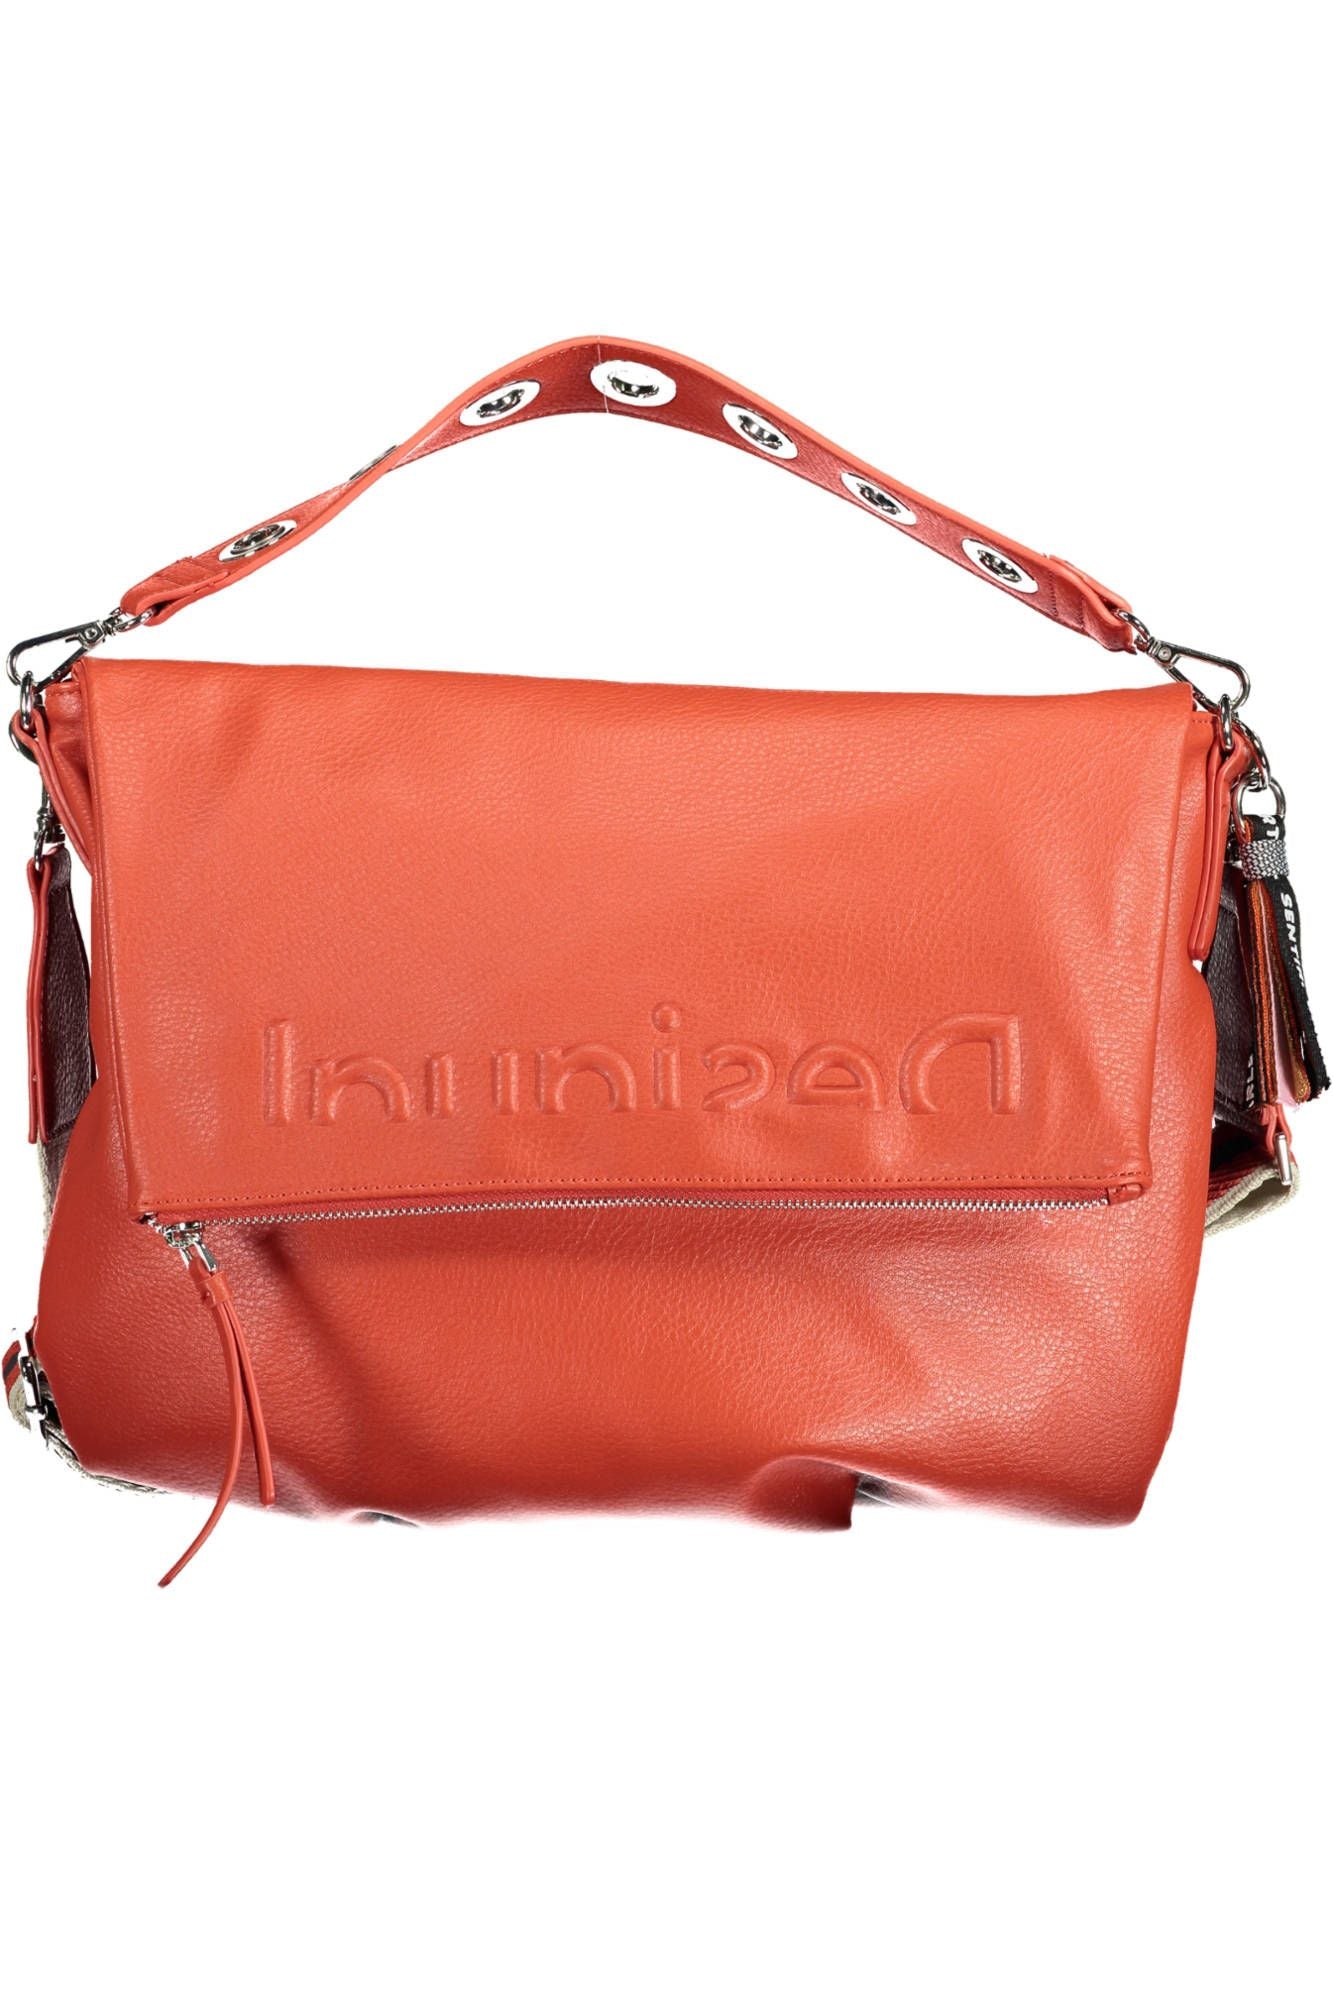 Chic Red Contrasting Detail Satchel